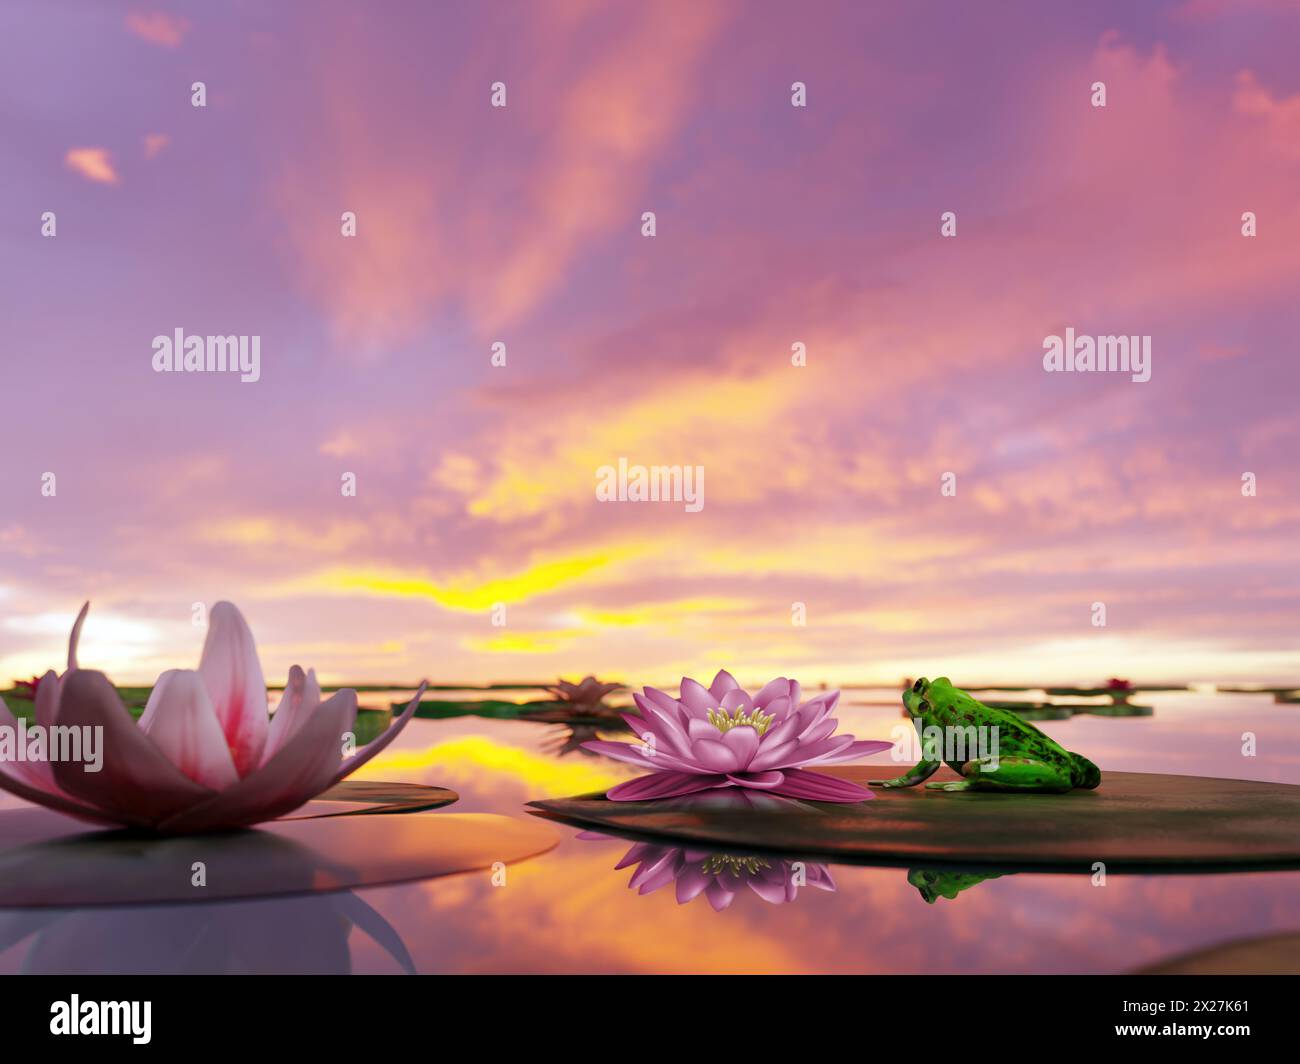 Dramatic fiery sunset reflecting in the pond surface with many waterlily plants and green frog admiring the vista Stock Photo